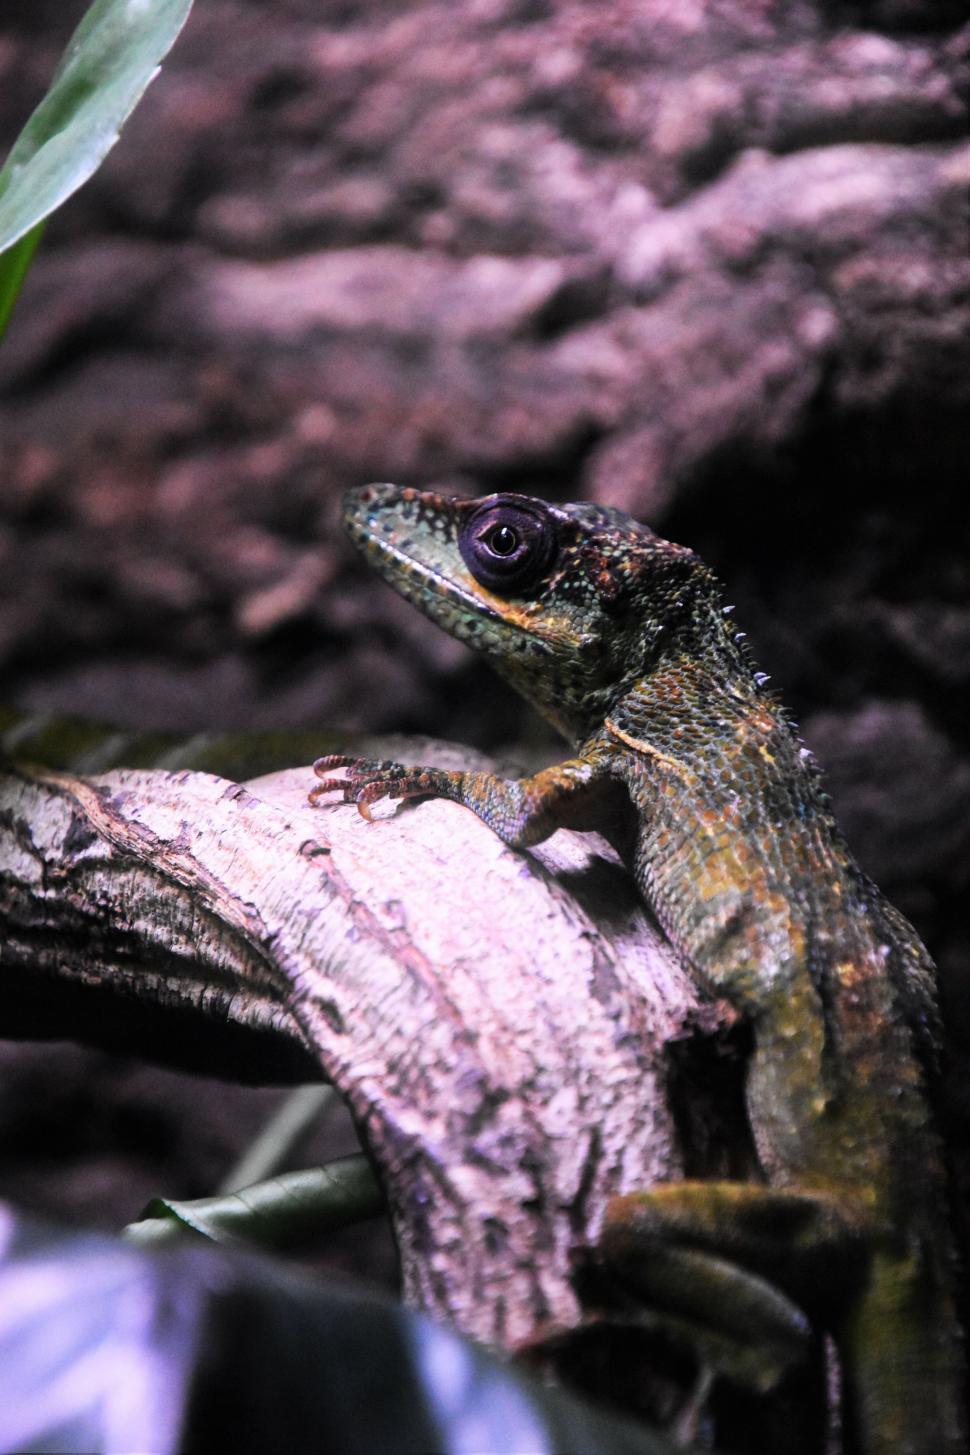 Free Image of Lizard Resting on Tree Branch 